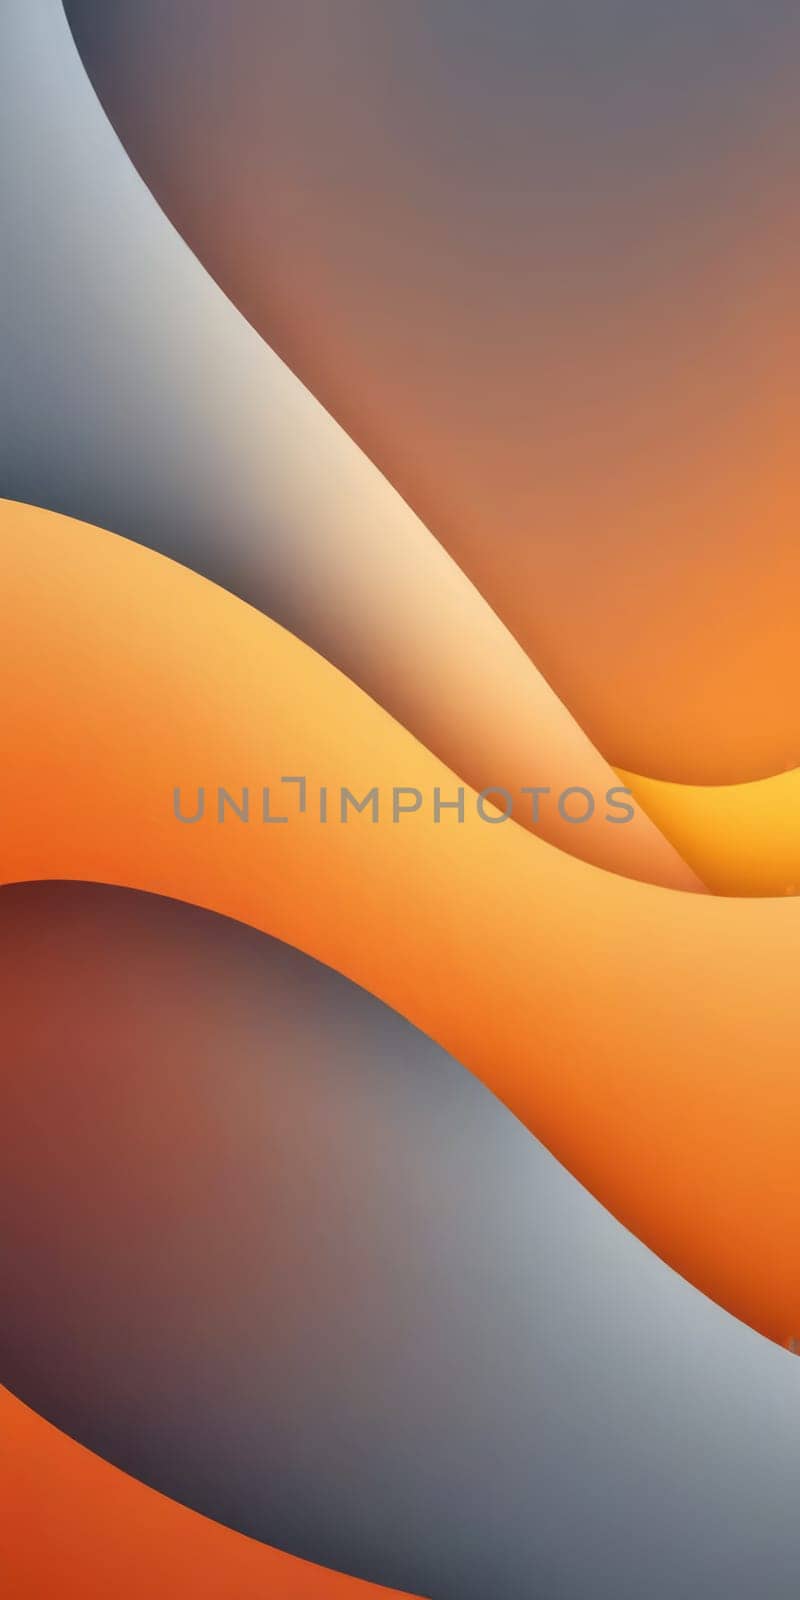 Spiral Shapes in Orange and Gray by nkotlyar